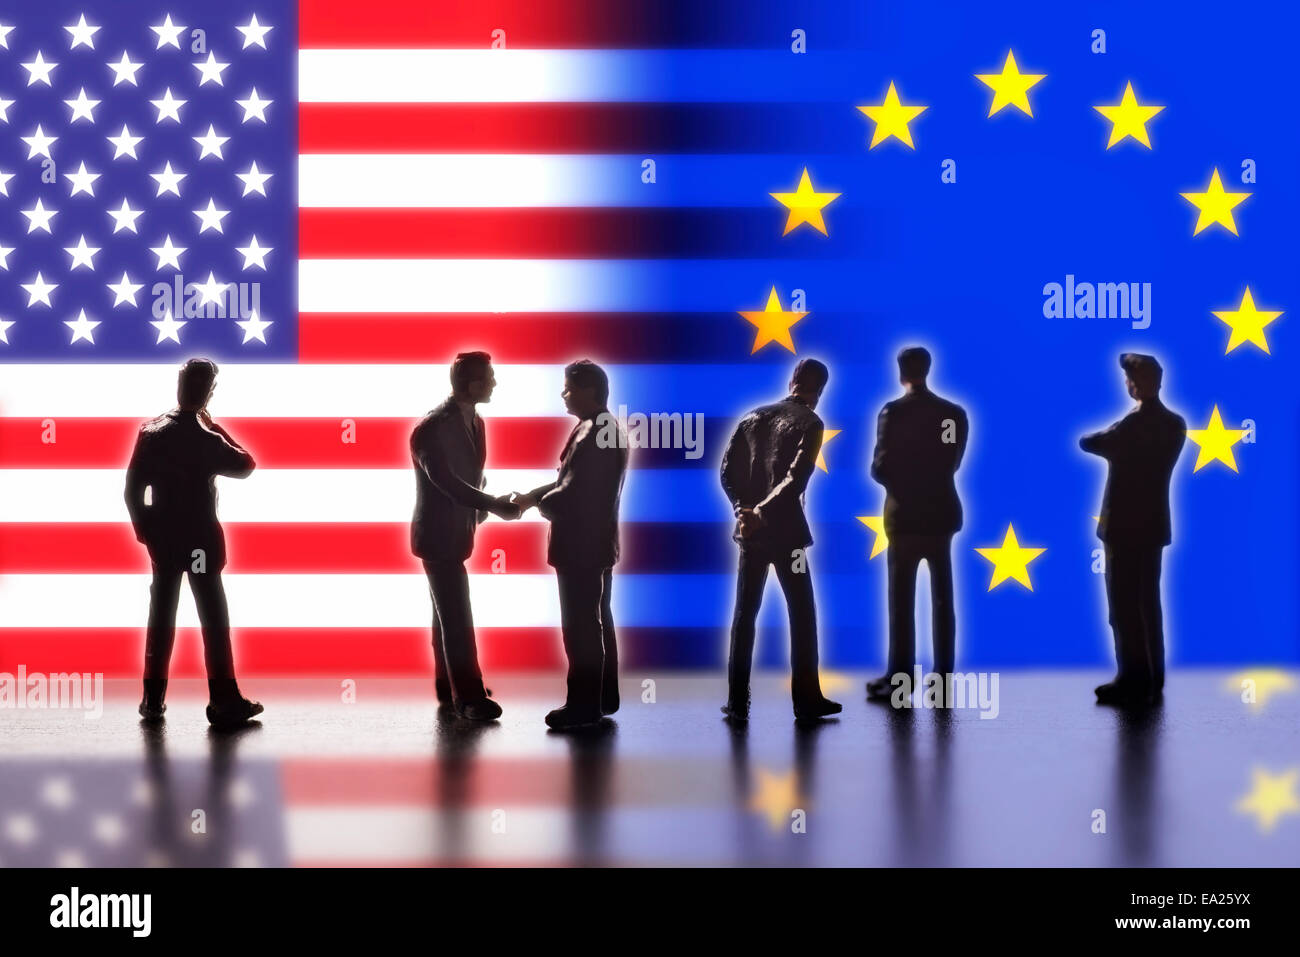 Model figures symbolizing politicians are facing the flags of the USA and the EU. Two of them shake hands. Stock Photo